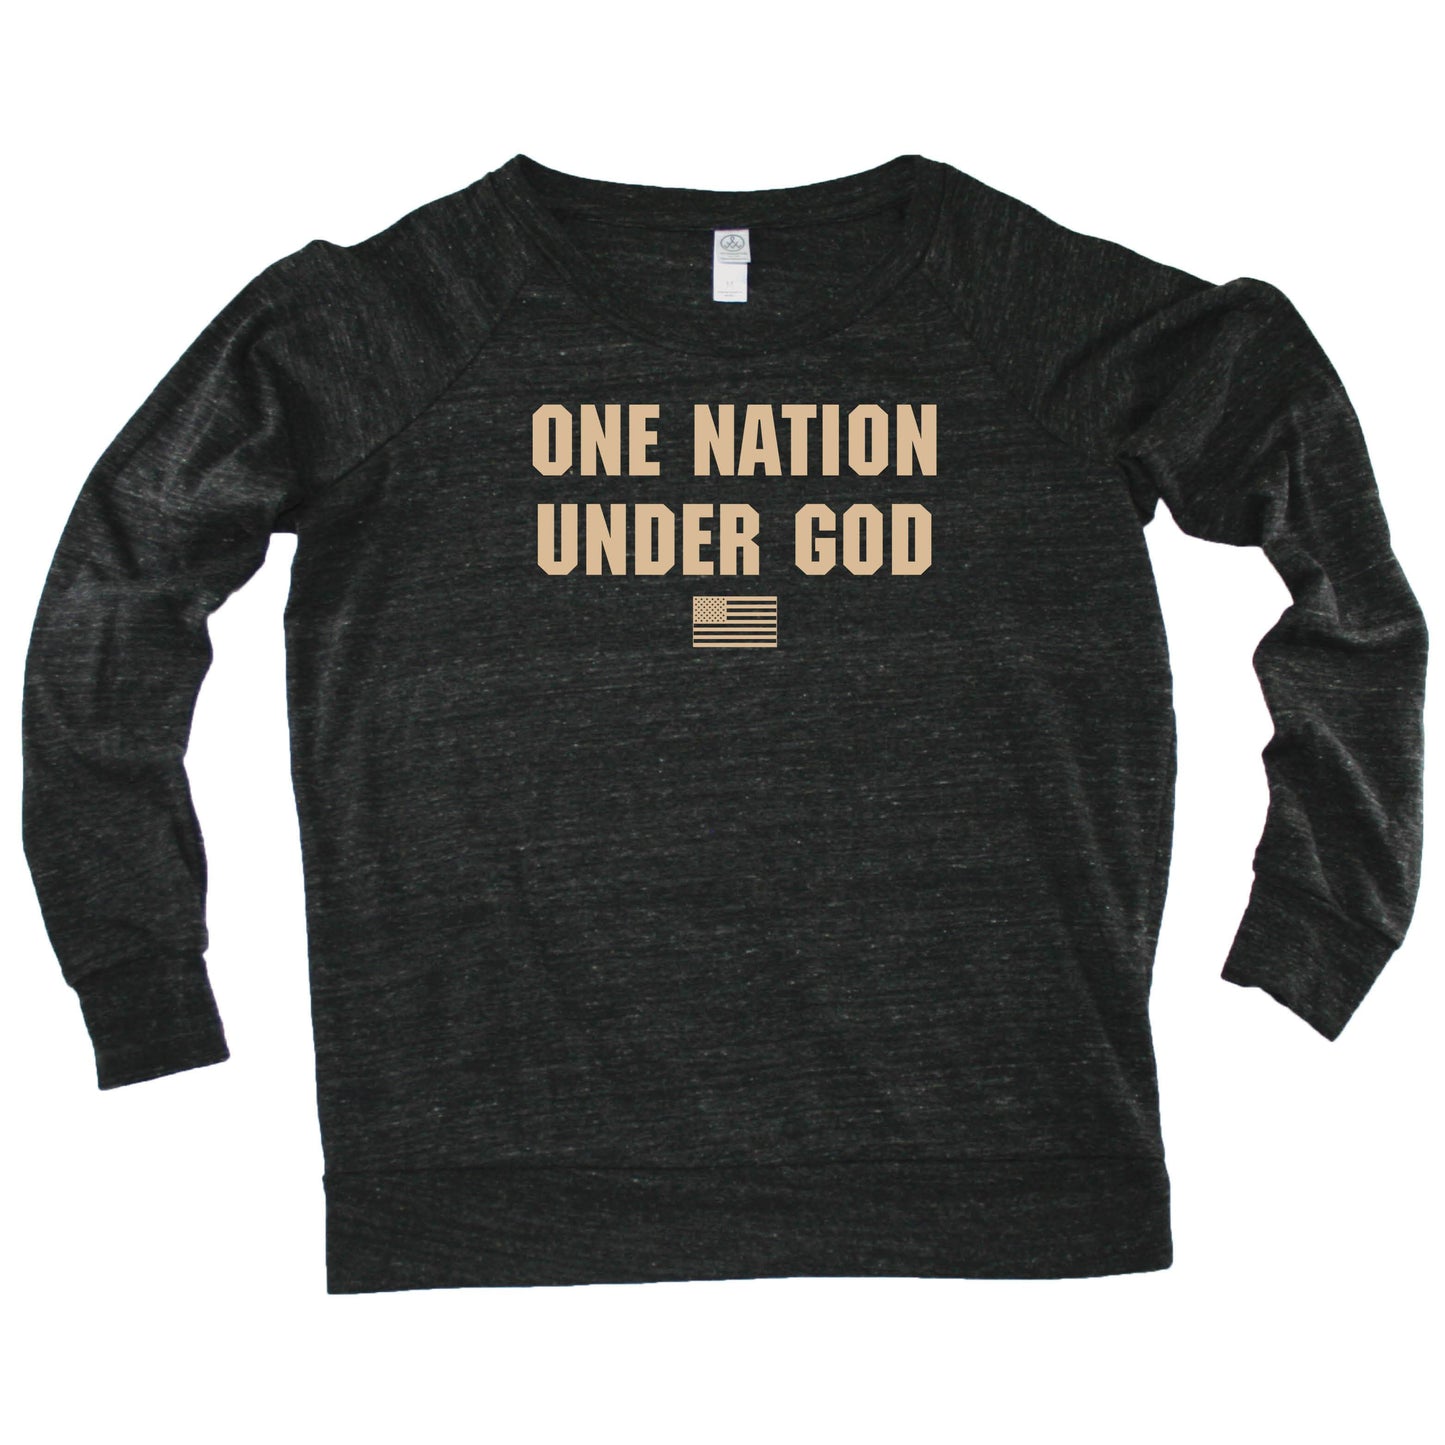 One Nation Under God - Slouchy Top